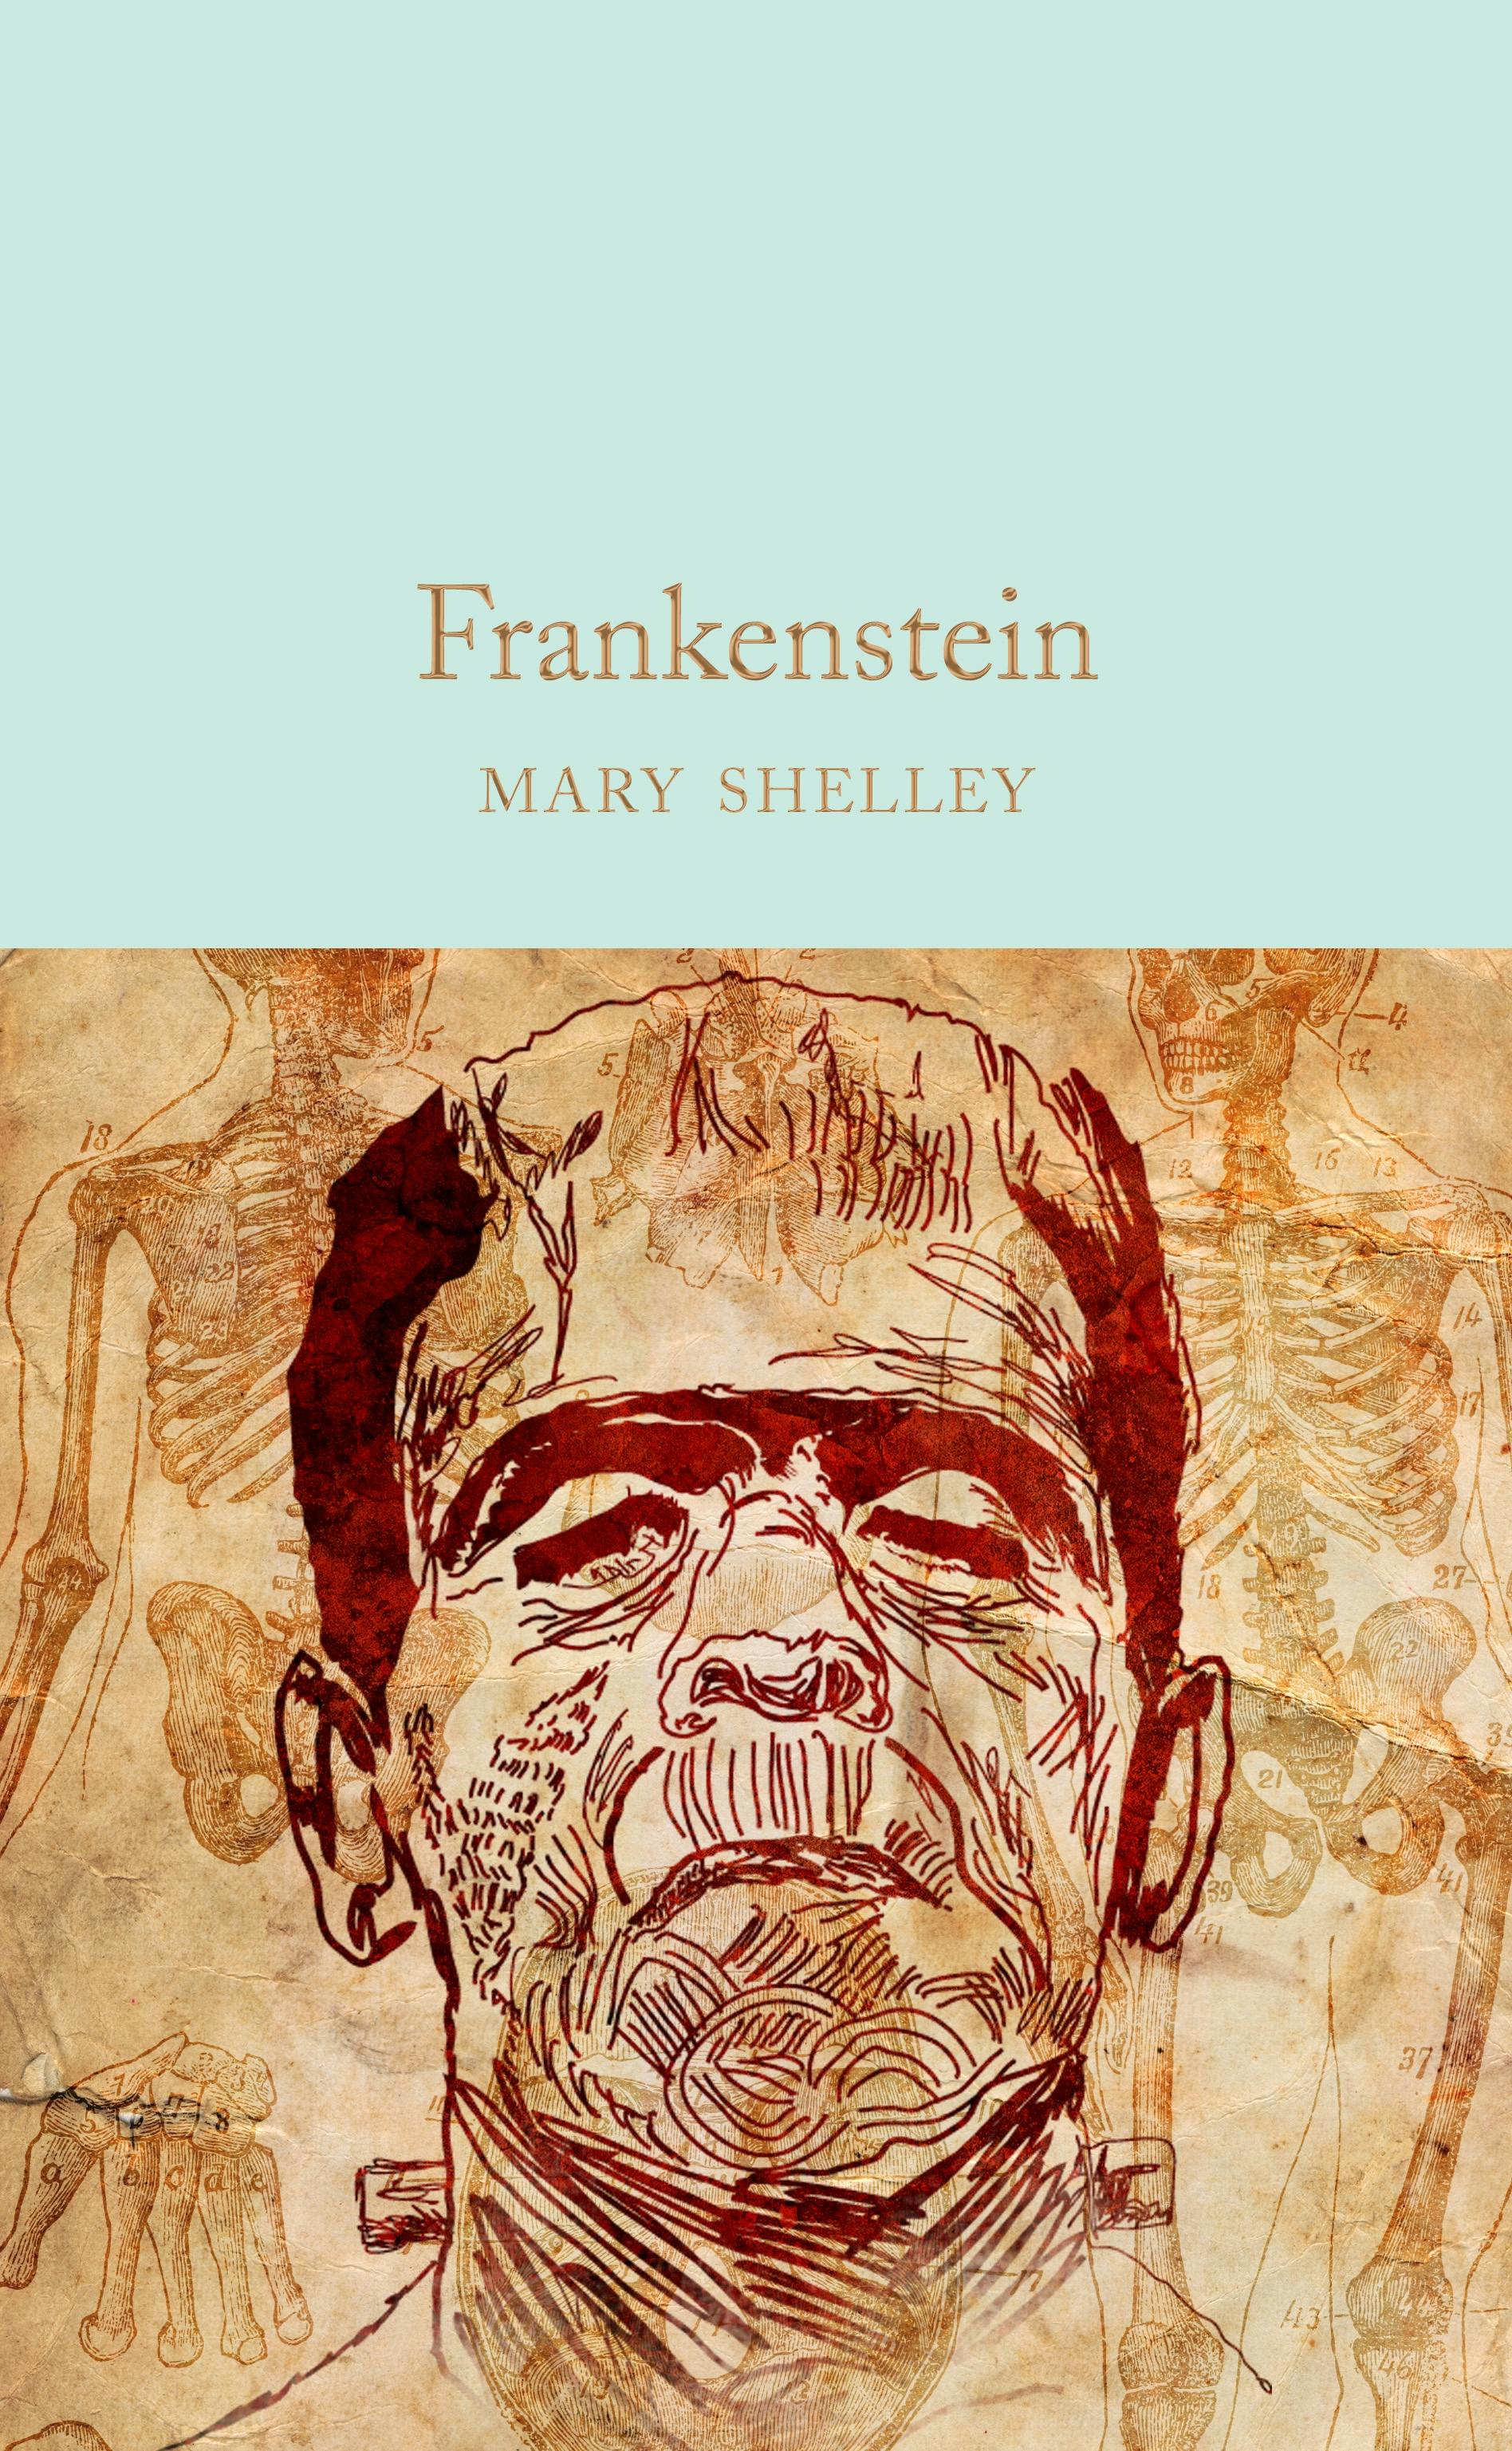 Frankenstein by Mary Shelley - Entire Book on T-Shirt | Best Gift for Readers and Book Lovers | Litographs